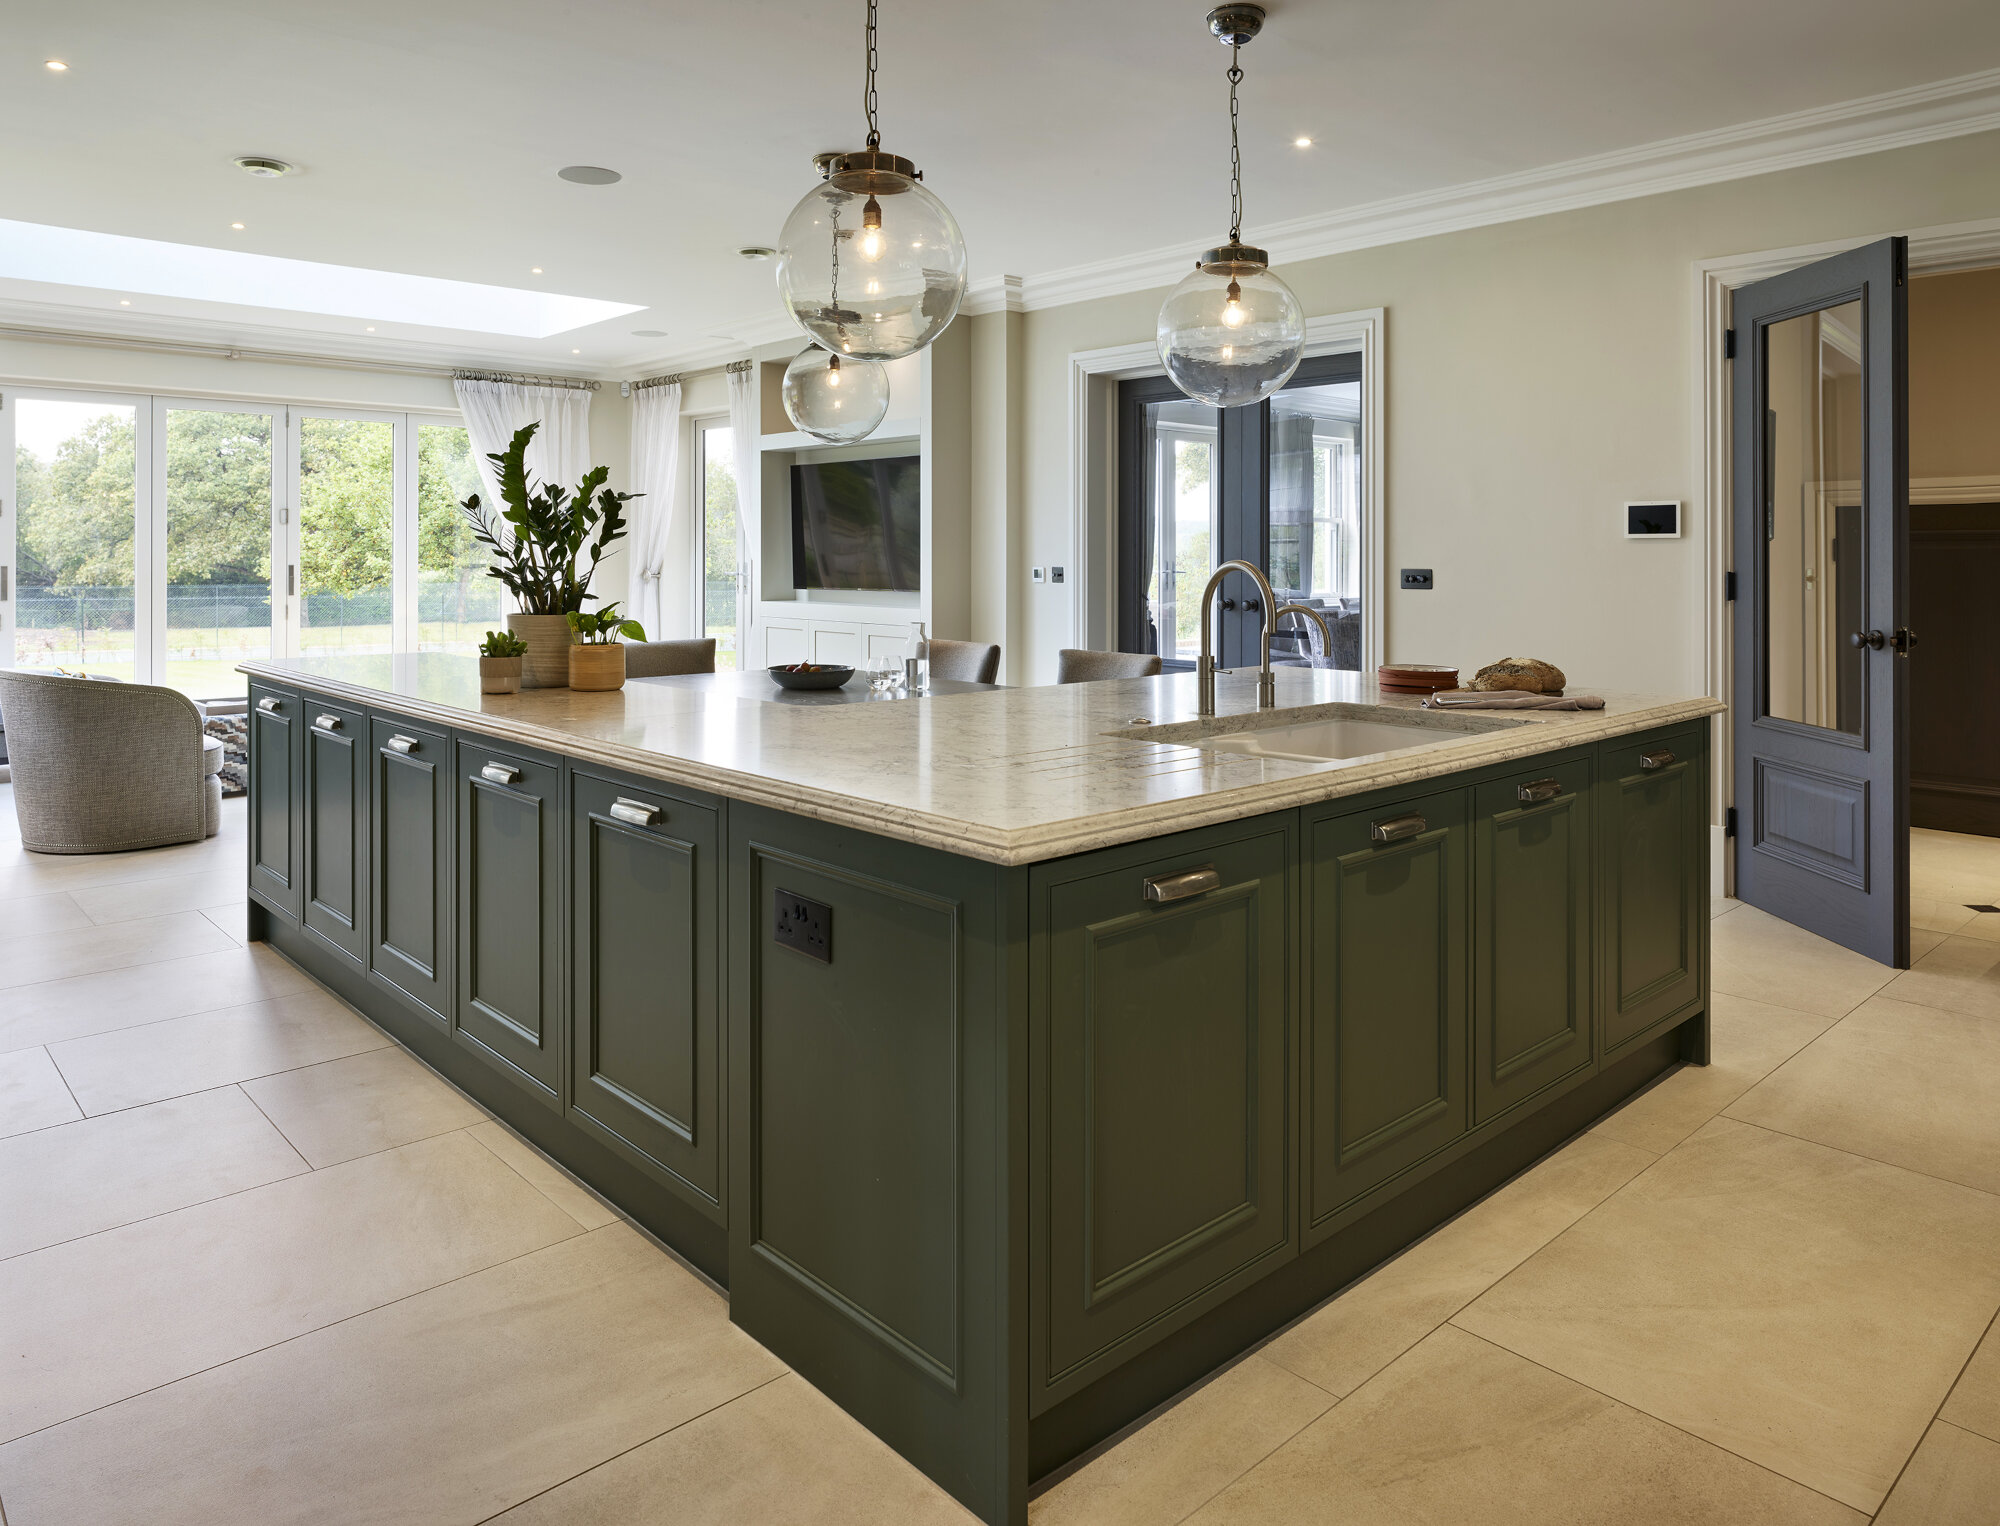 High End traditional Kitchens In Long Sutton